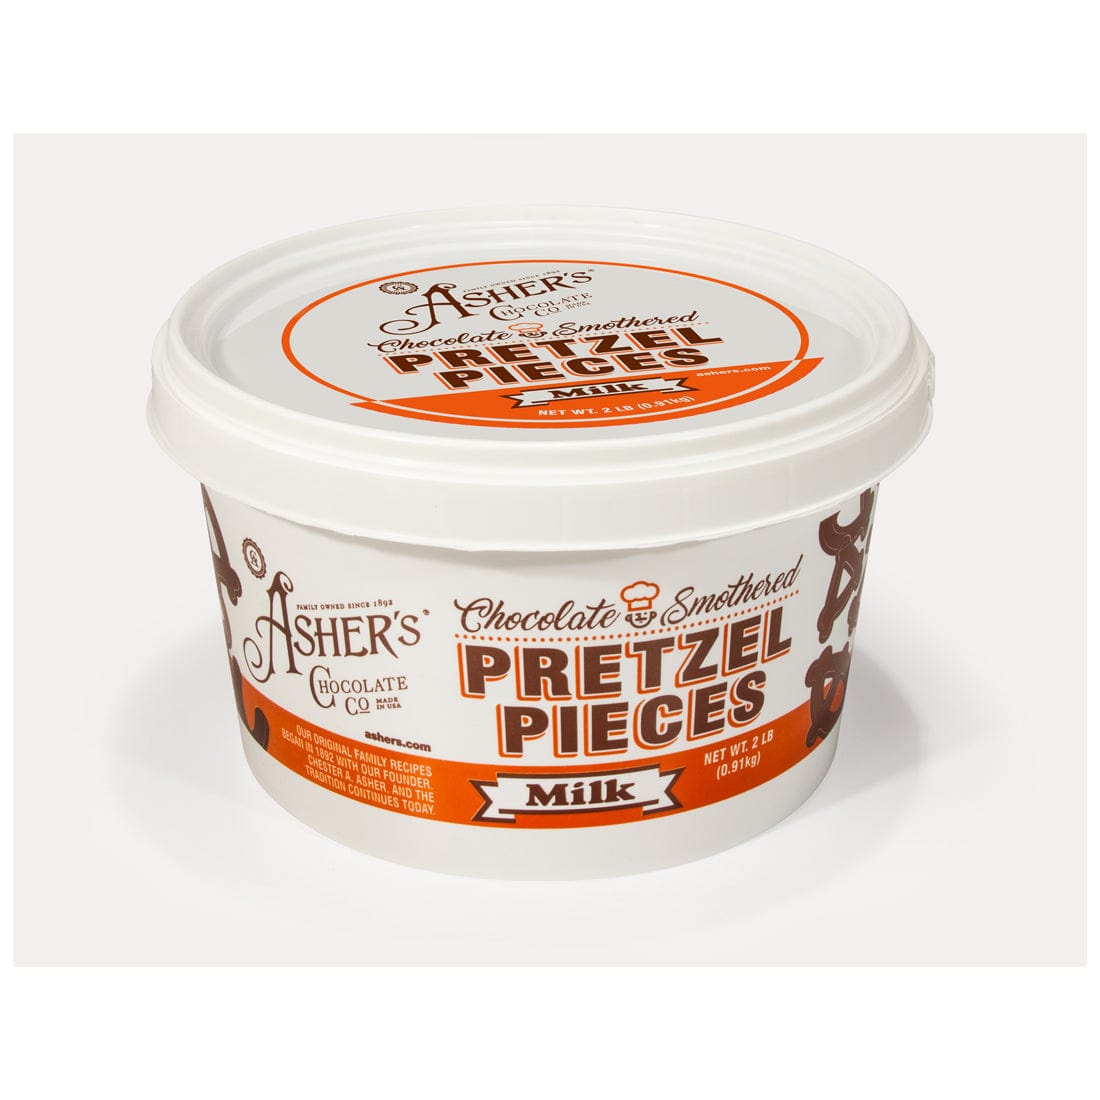 Asher's Asher's Milk Chocolate Smothered Pretzel Pieces – 2 lb. Pail